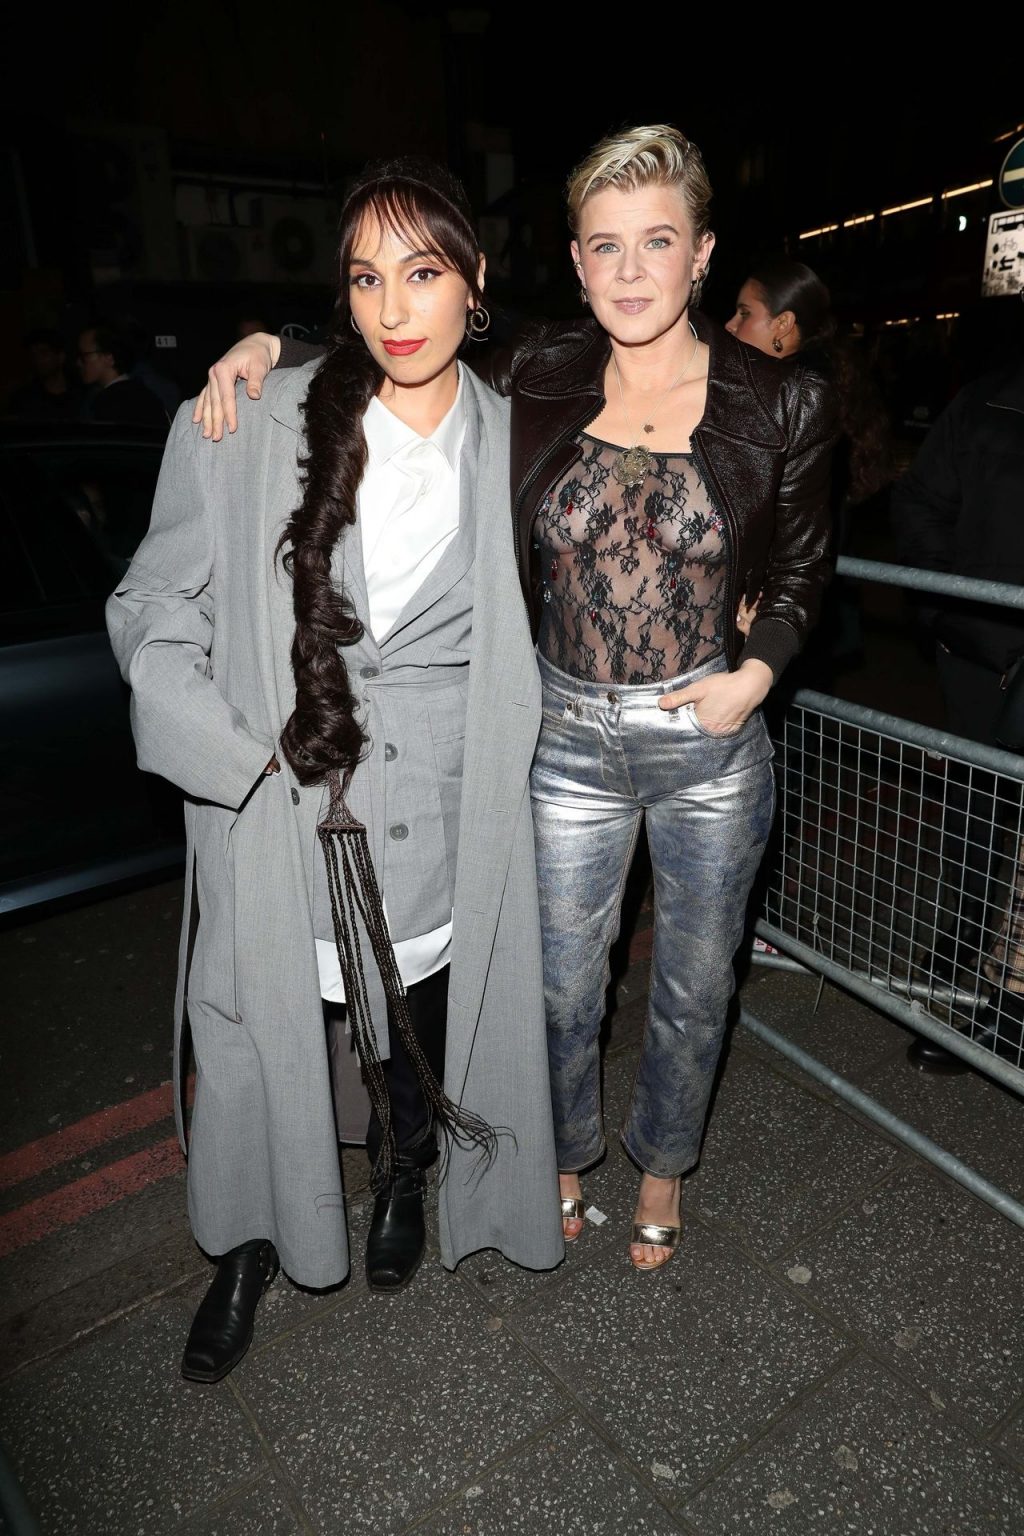 Robyn Makes Busty Appearance with a Friend Arrive at the NME Awards (14 Photos)